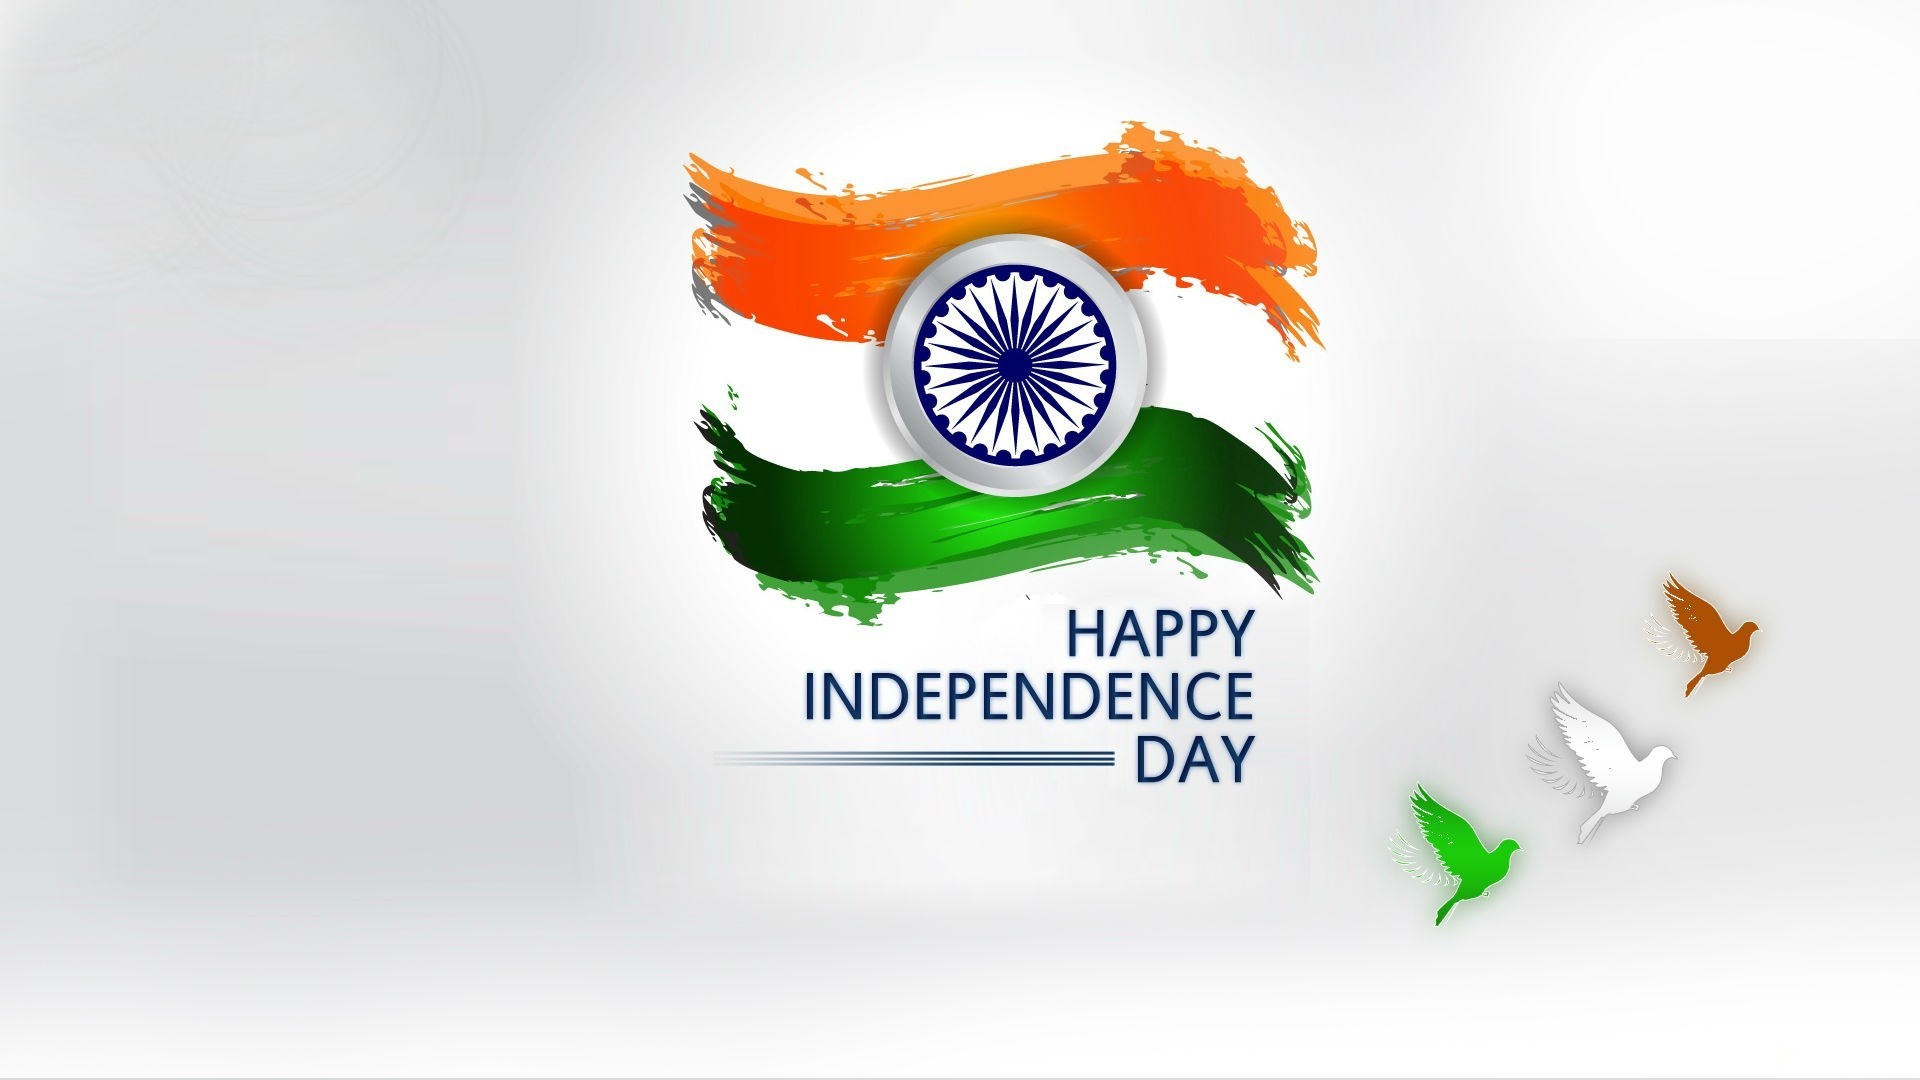 Happy Independence Day 2015 HD Wallpaper HD Wallpapers